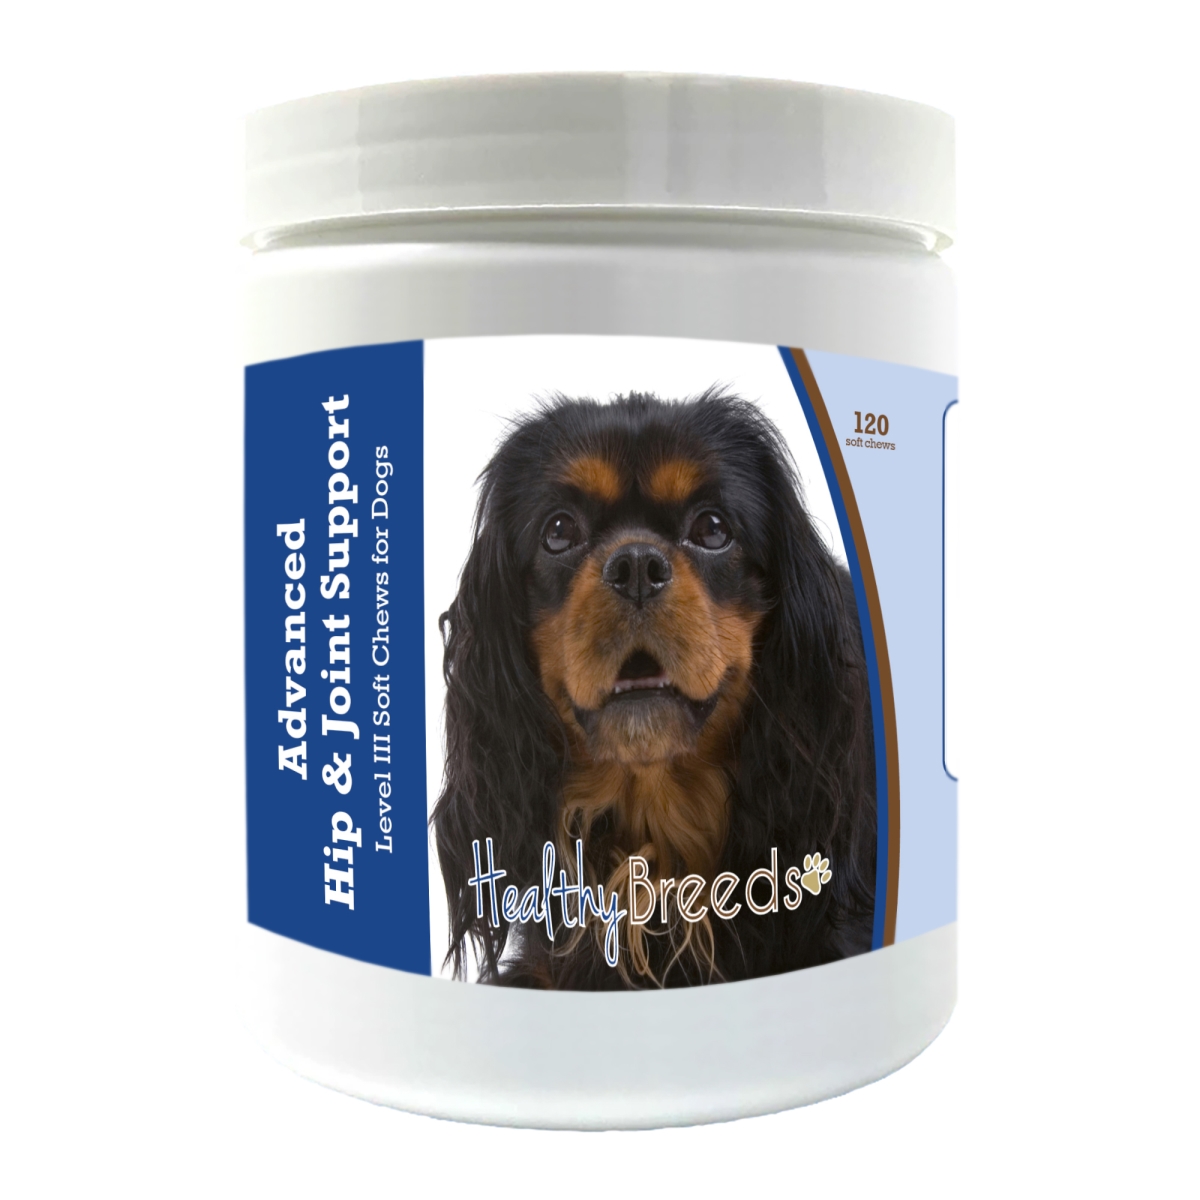 Picture of Healthy Breeds 192959898217 English Toy Spaniel Advanced Hip & Joint Support Level III Soft Chews for Dogs